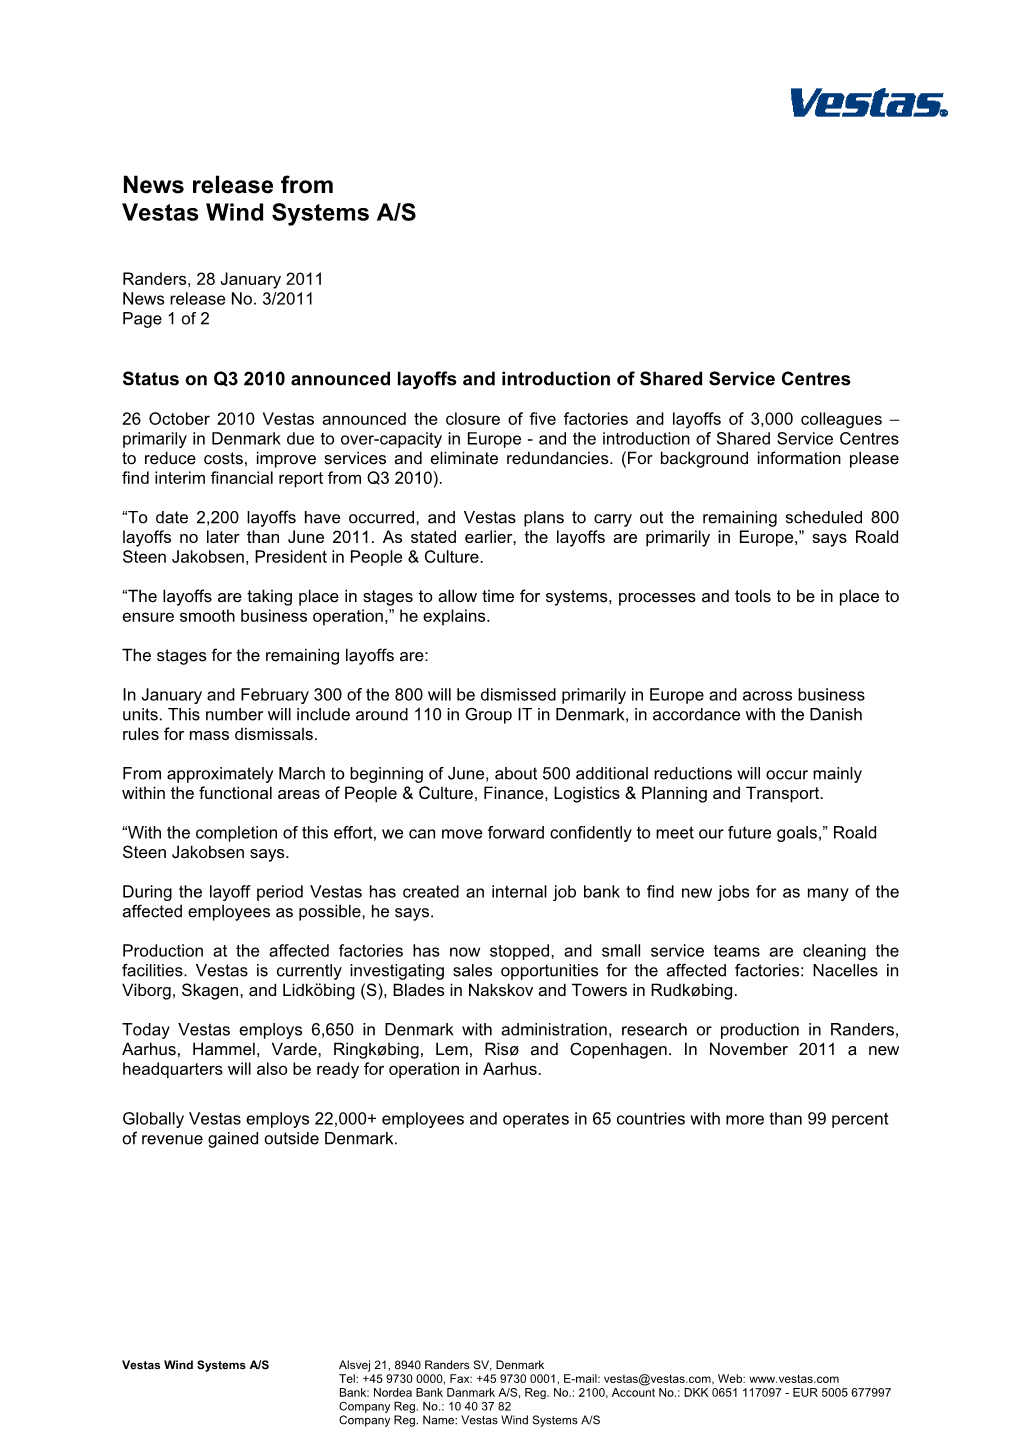 News Release from Vestas Wind Systems A/S